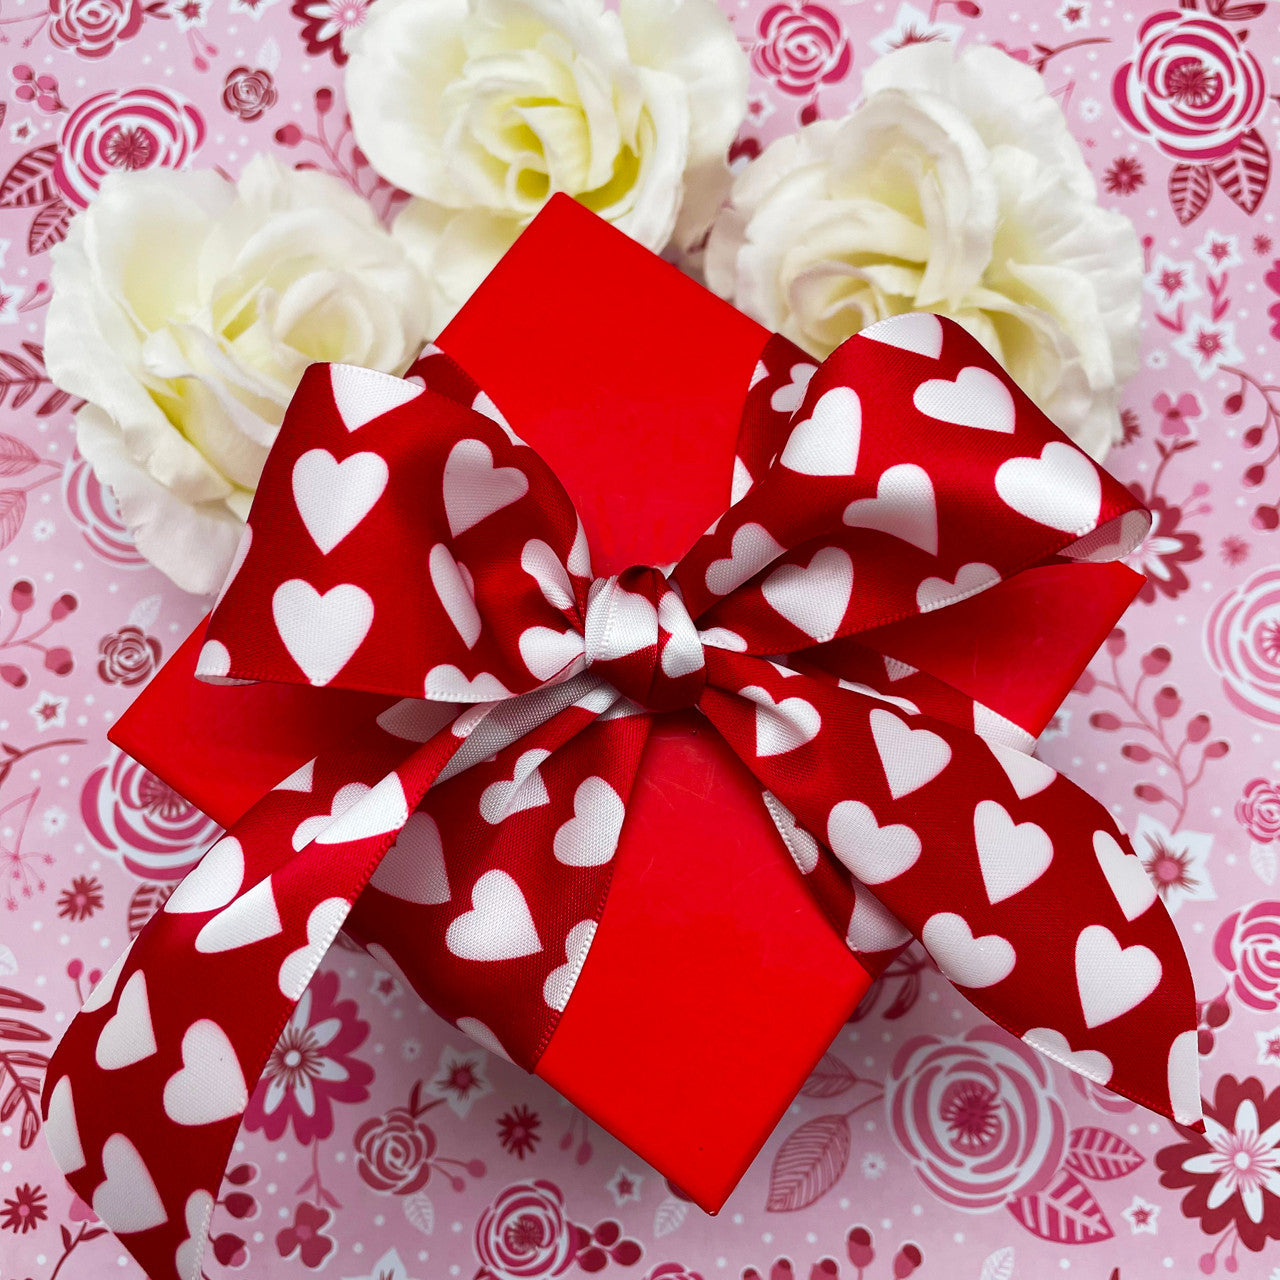 Be sure to tie your Valentine gifts with a pretty bow!!